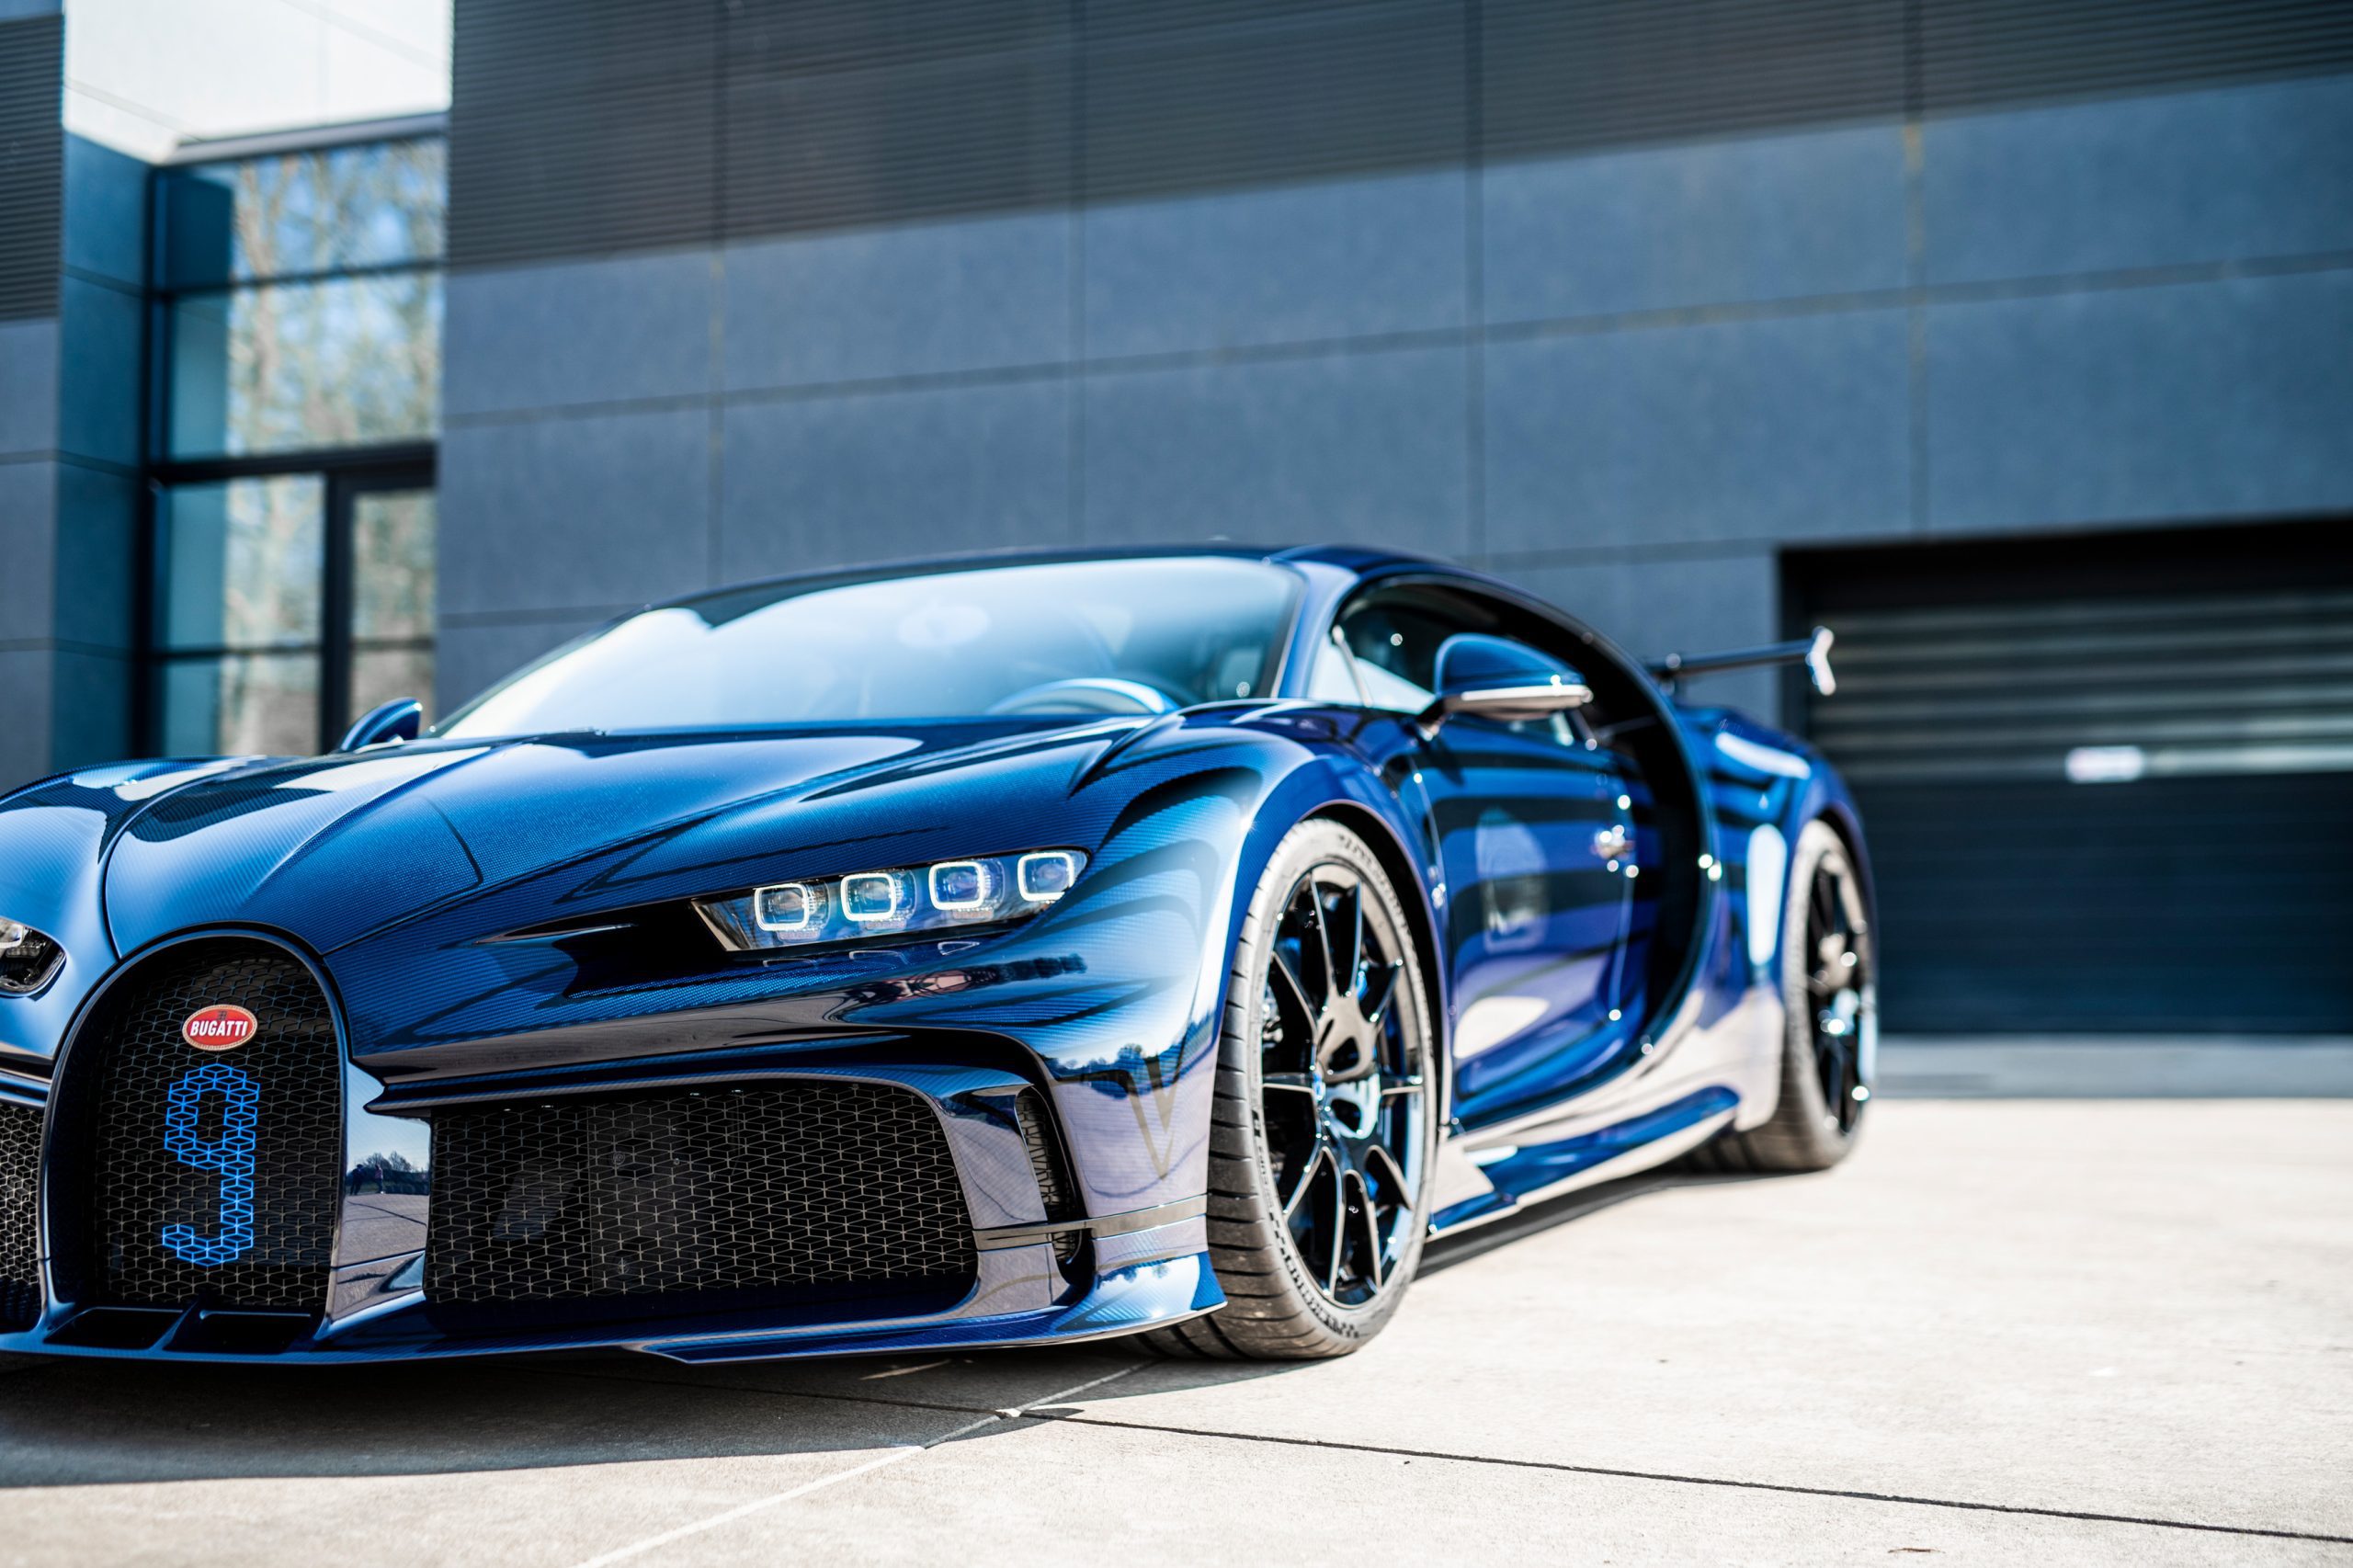 Bugatti Revealed By Sur Two Gallery) Light Photo Inspired (With Mesure Bespoke Creations More